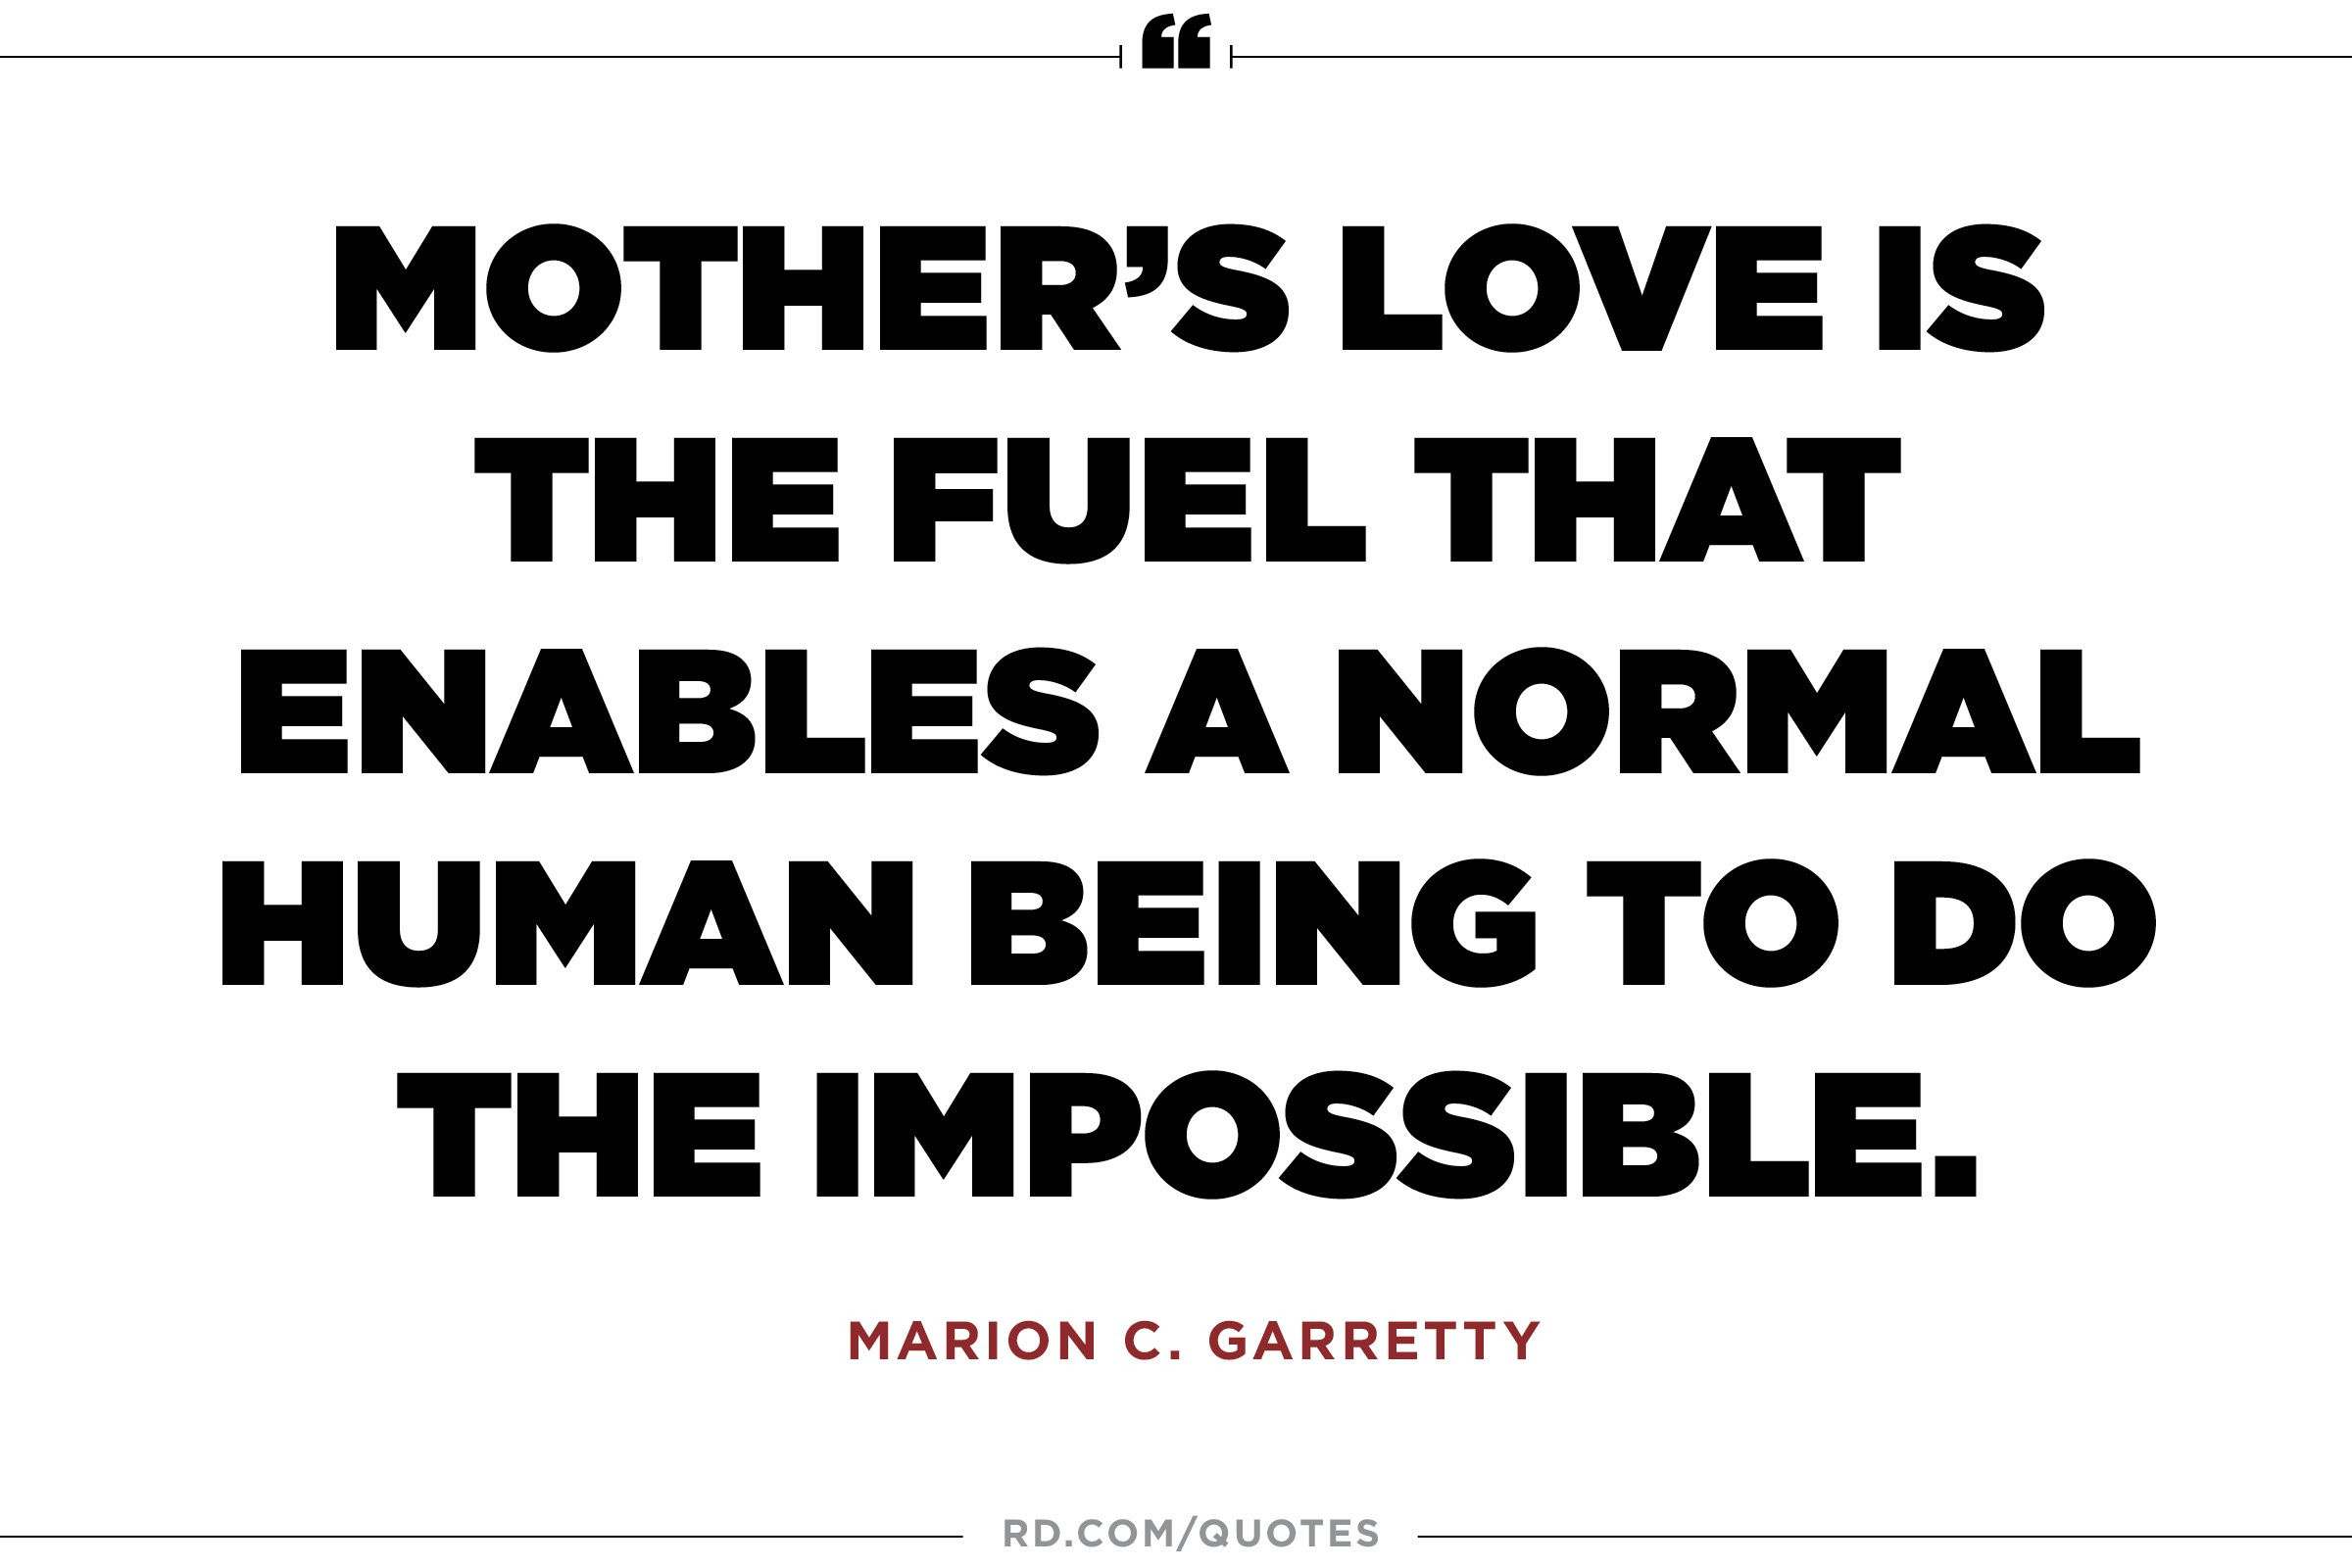 Quotes On Motherly Love
 11 Quotes About Mothers That ll Make You Call Yours